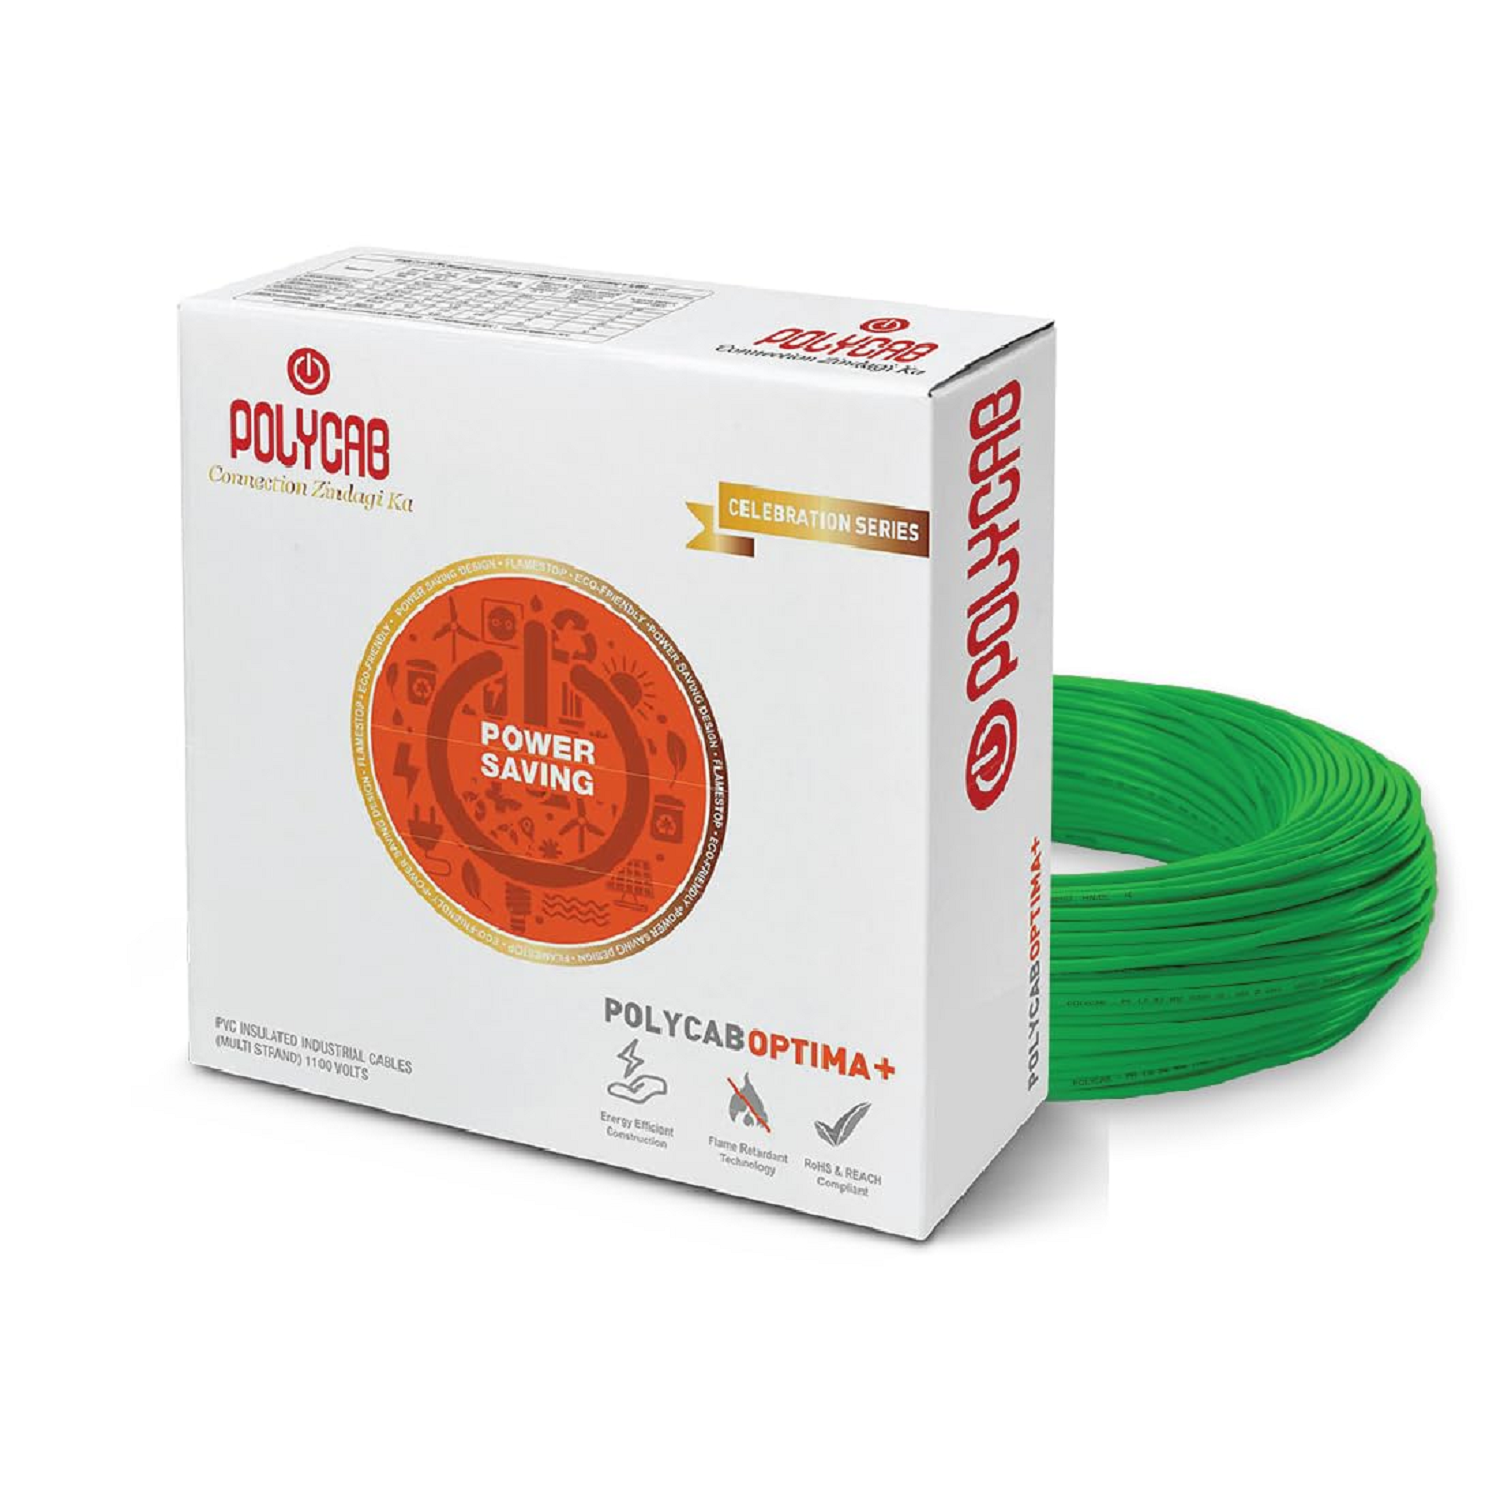 Polycab Optima Plus FR-LF 1 SQ-MM, 90 Meters PVC Insulated Copper Wire Single Core (Green)